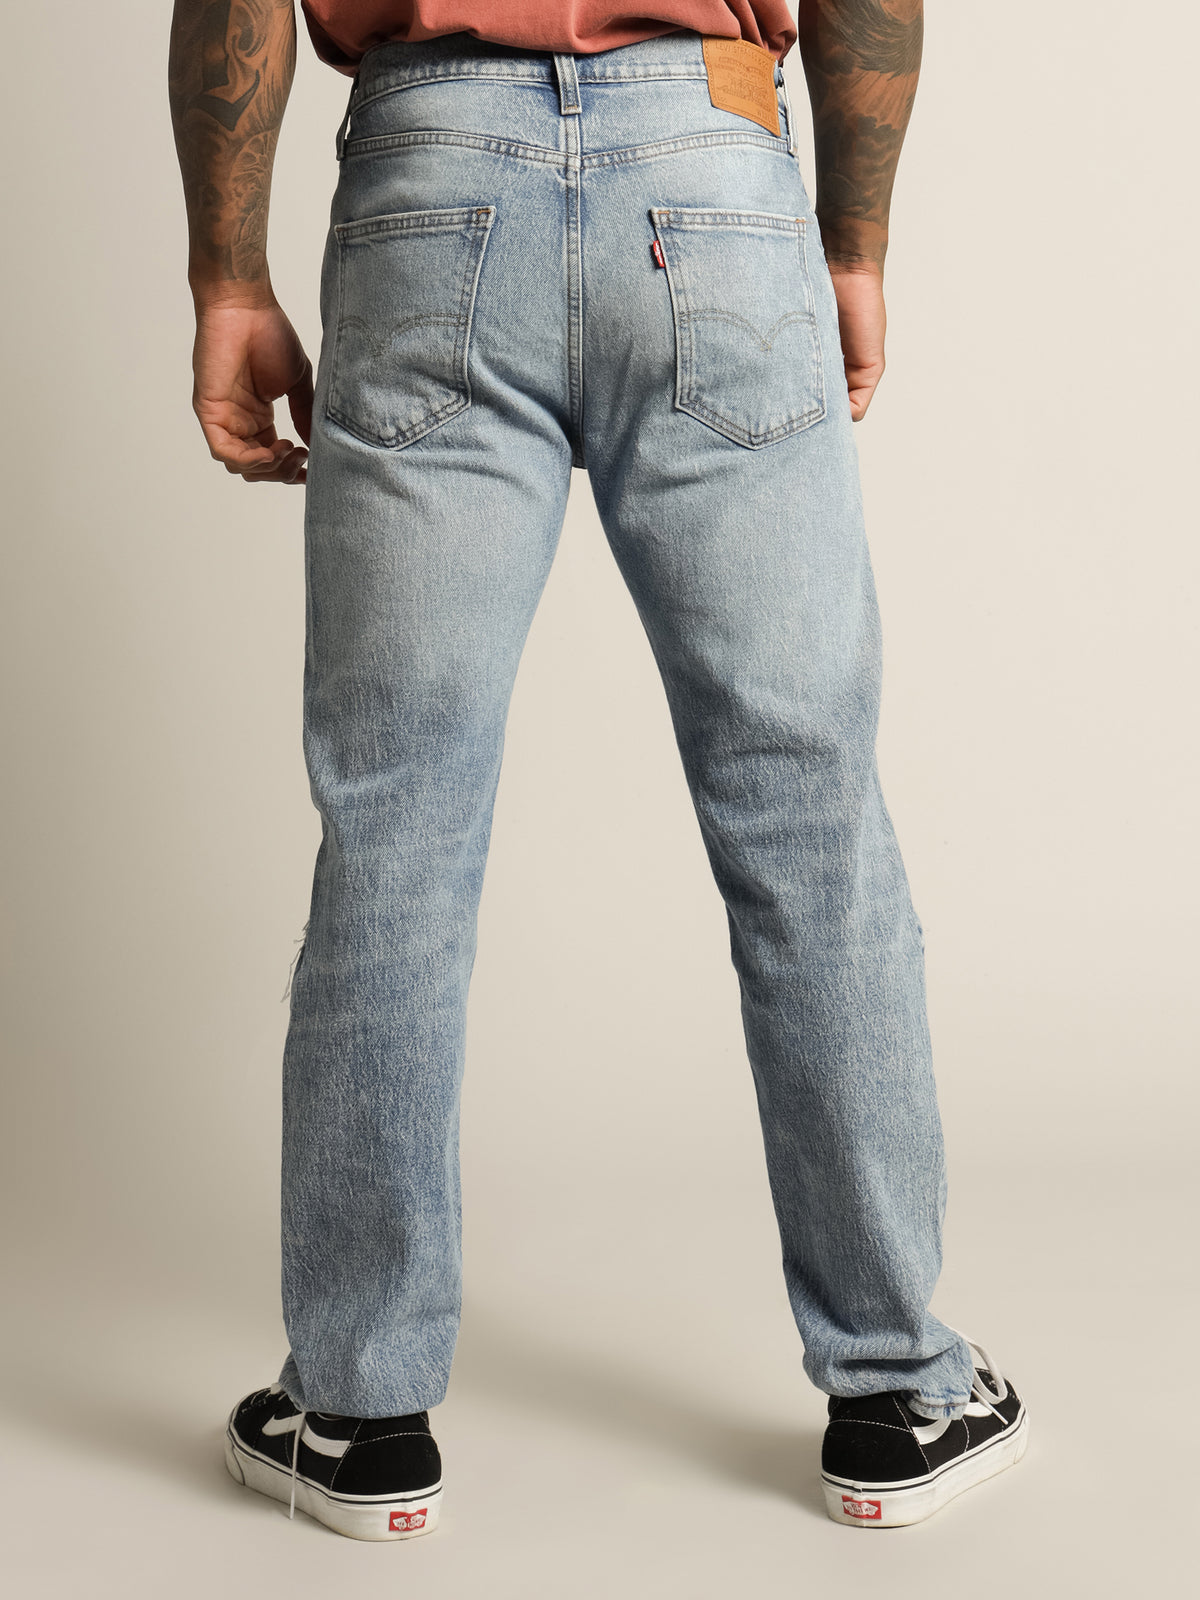 So High Slim Fit Jeans in California Star DX